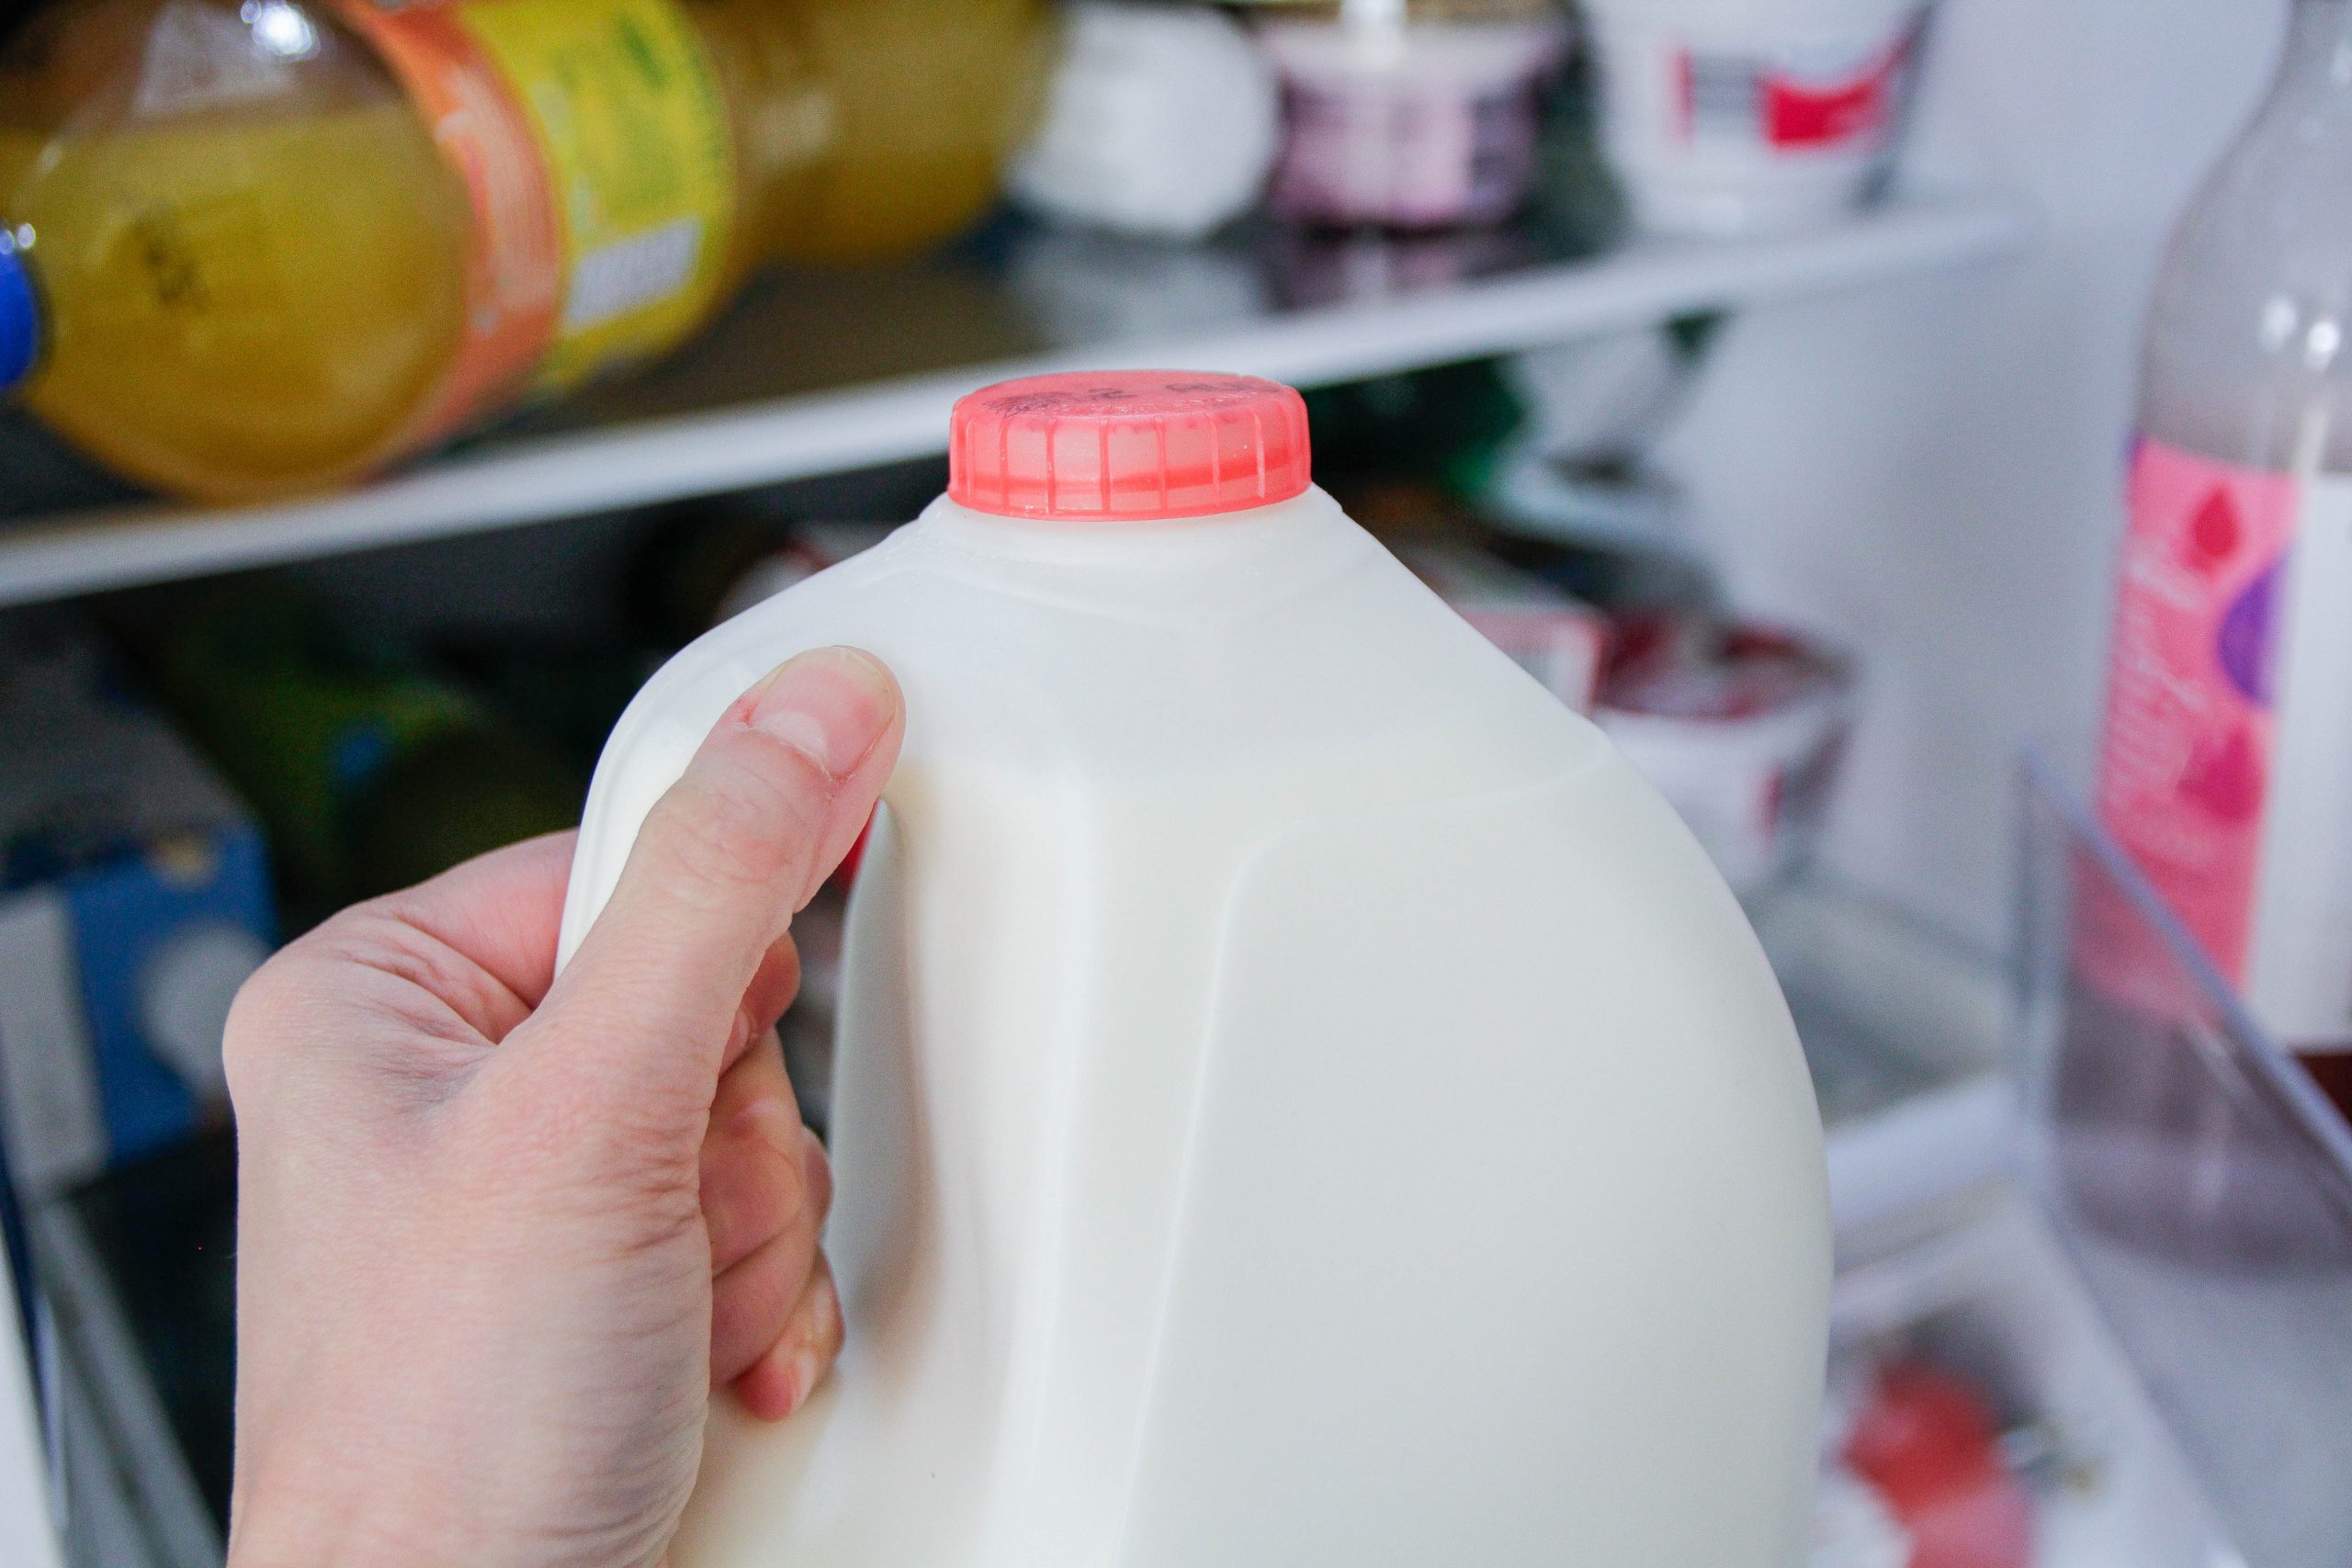 How to get free milk from supermarkets like Iceland, Tesco and Aldi